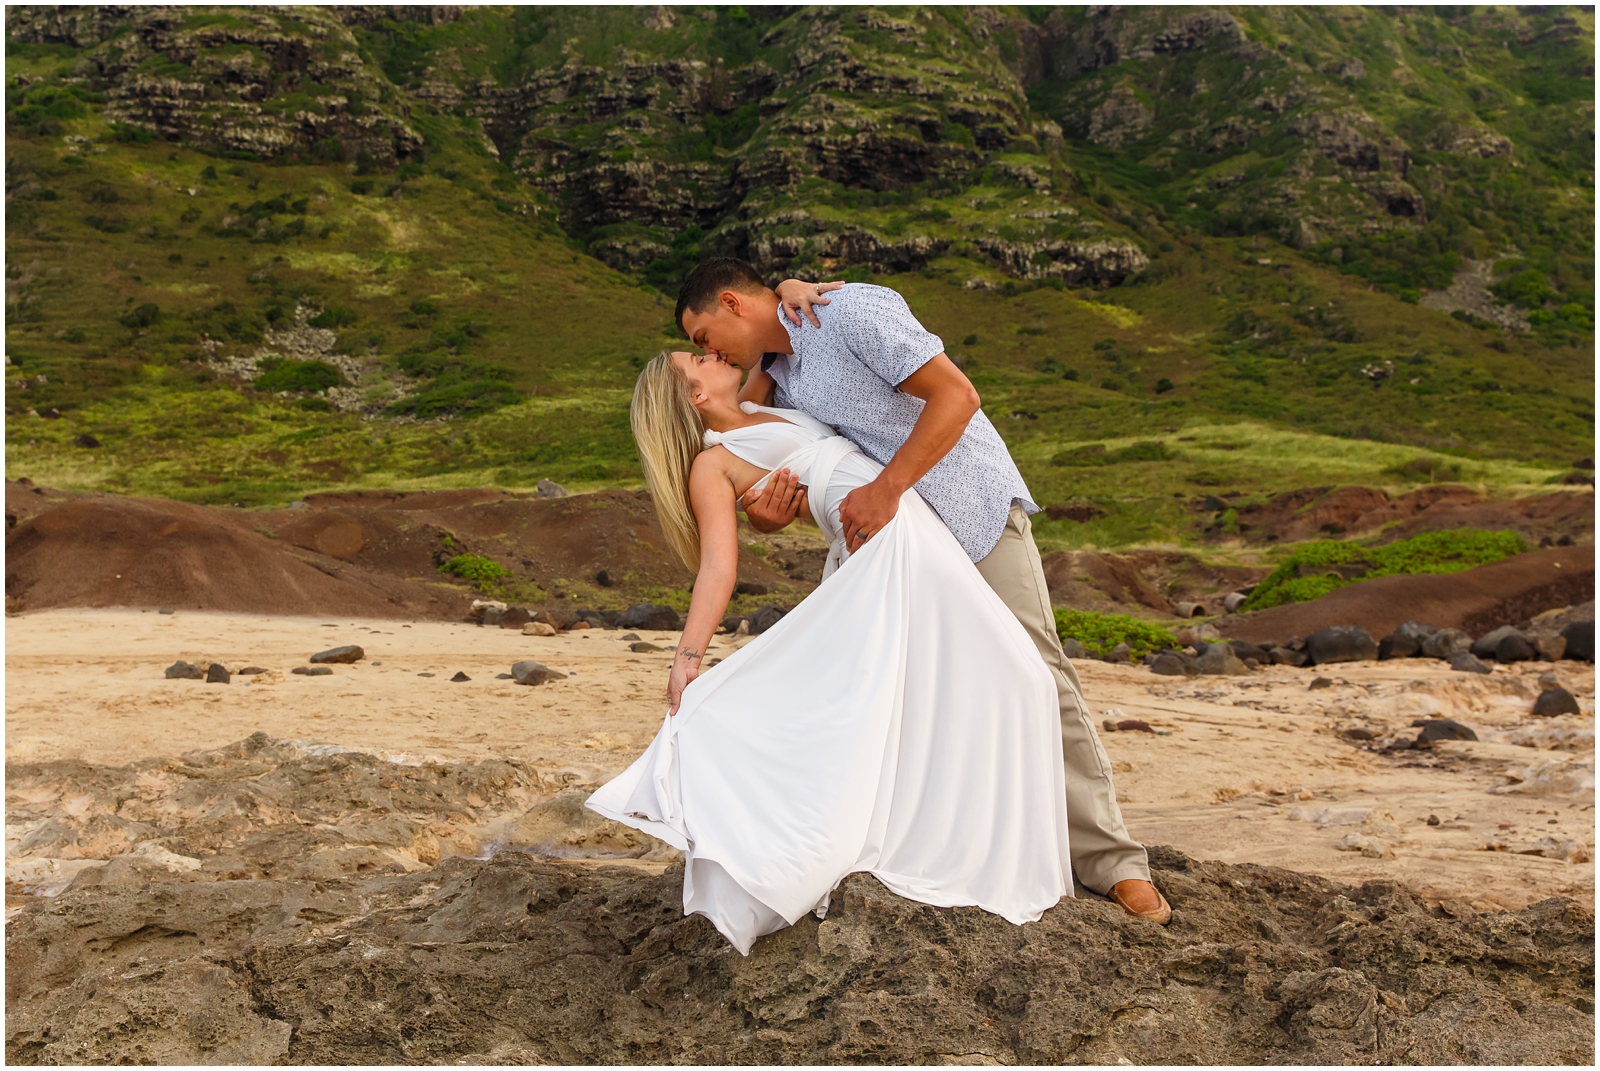 This couple eloped on the North Shore of Oahu, Hawaii.